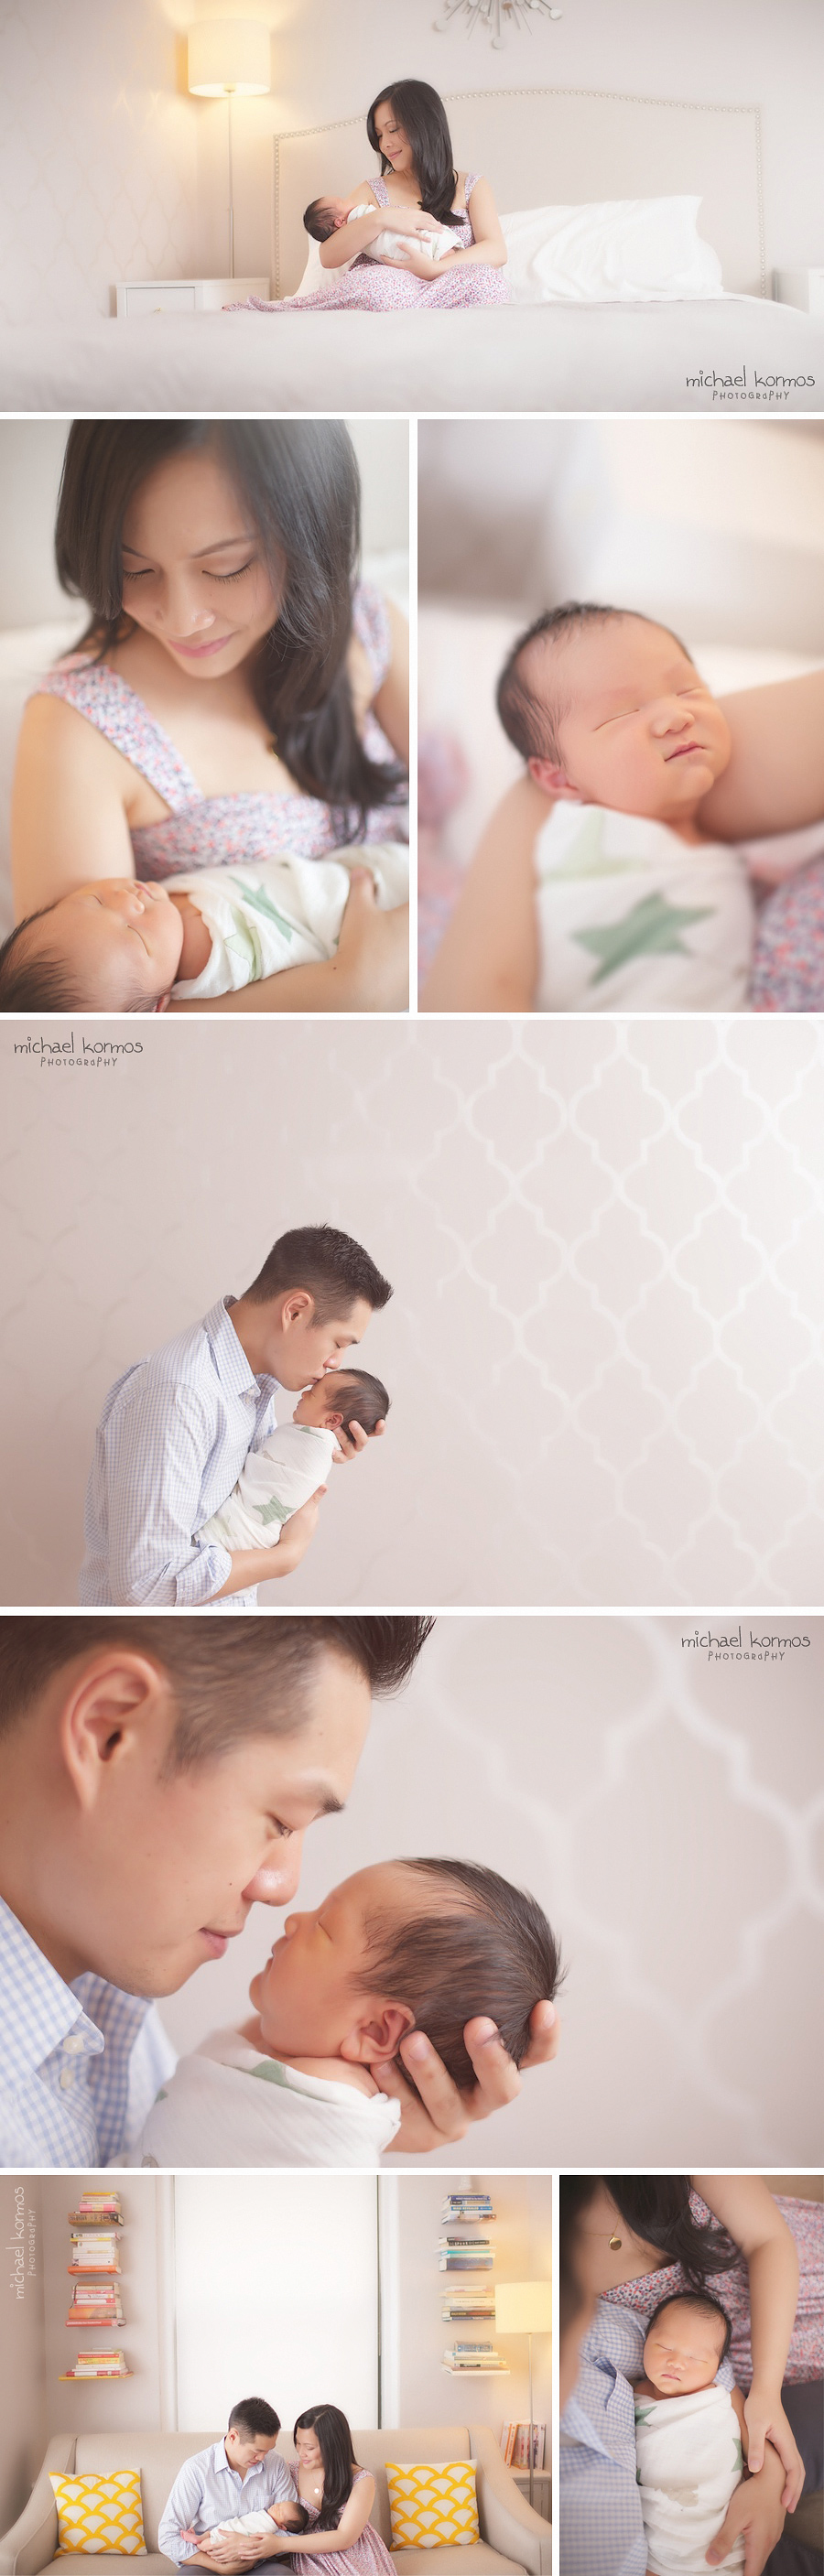 modern lifestyle session to capture meaningful newborn and family photography